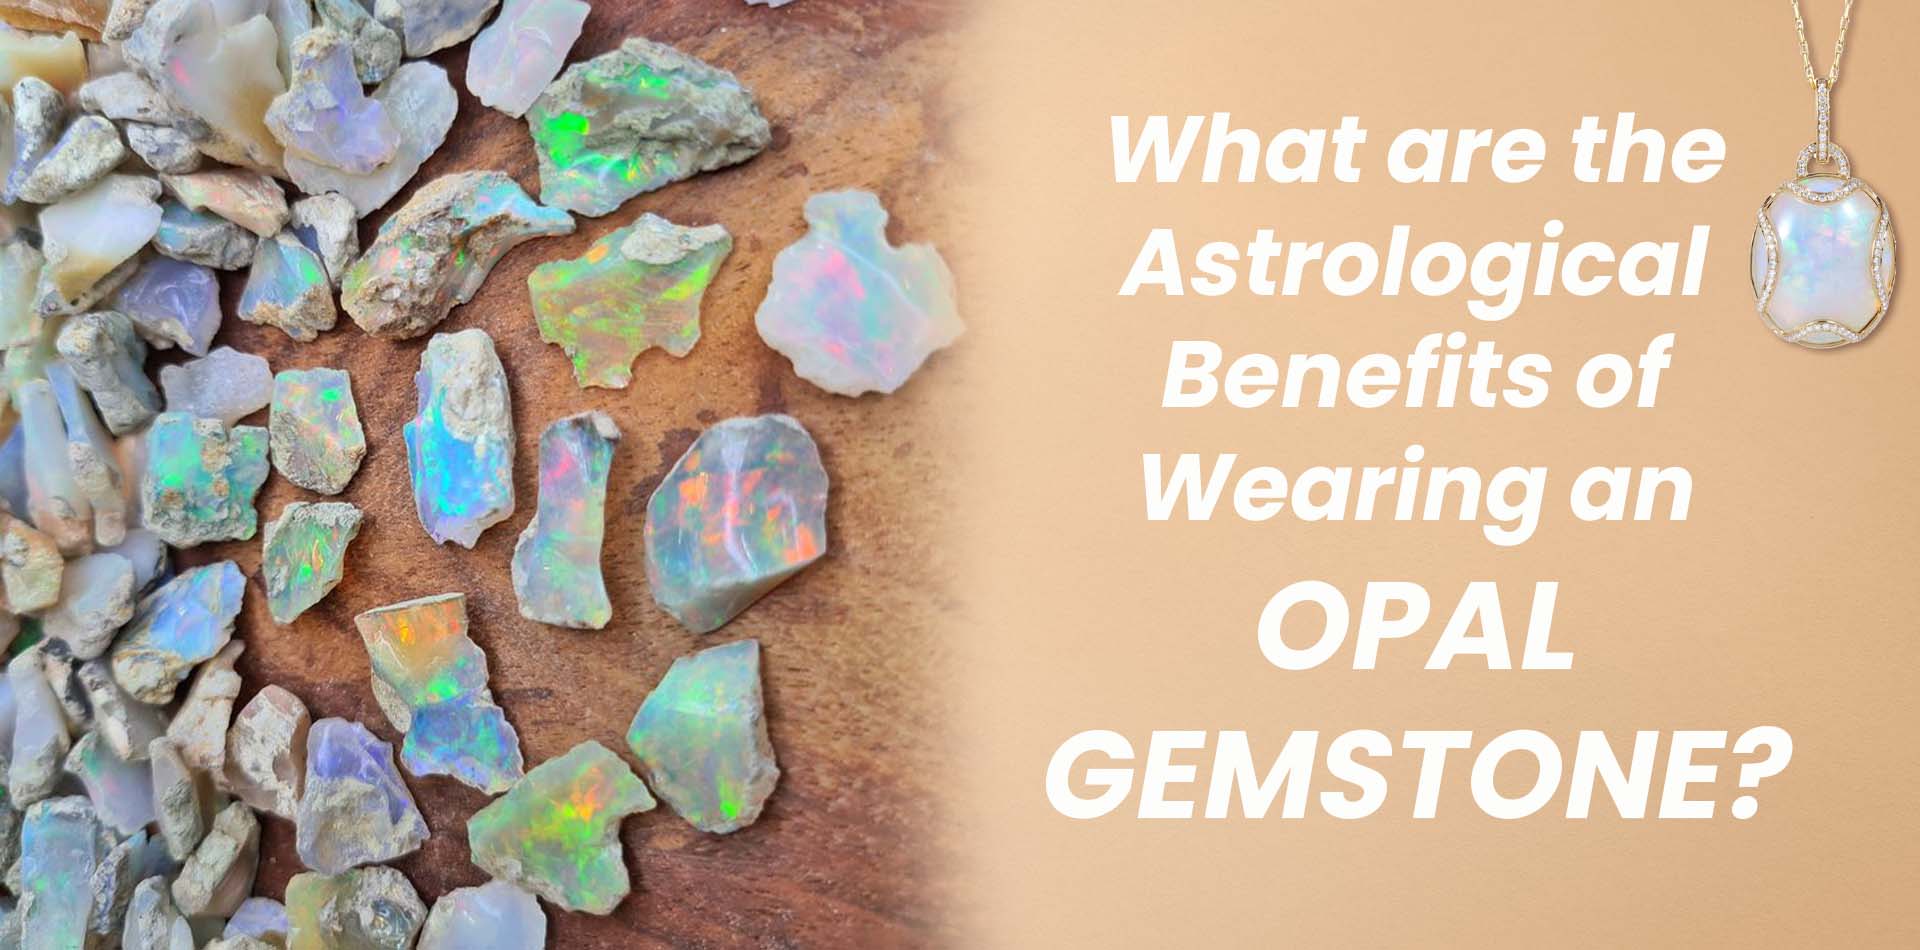 What are the Astrological Benefits of Wearing an Opal Gemstone?